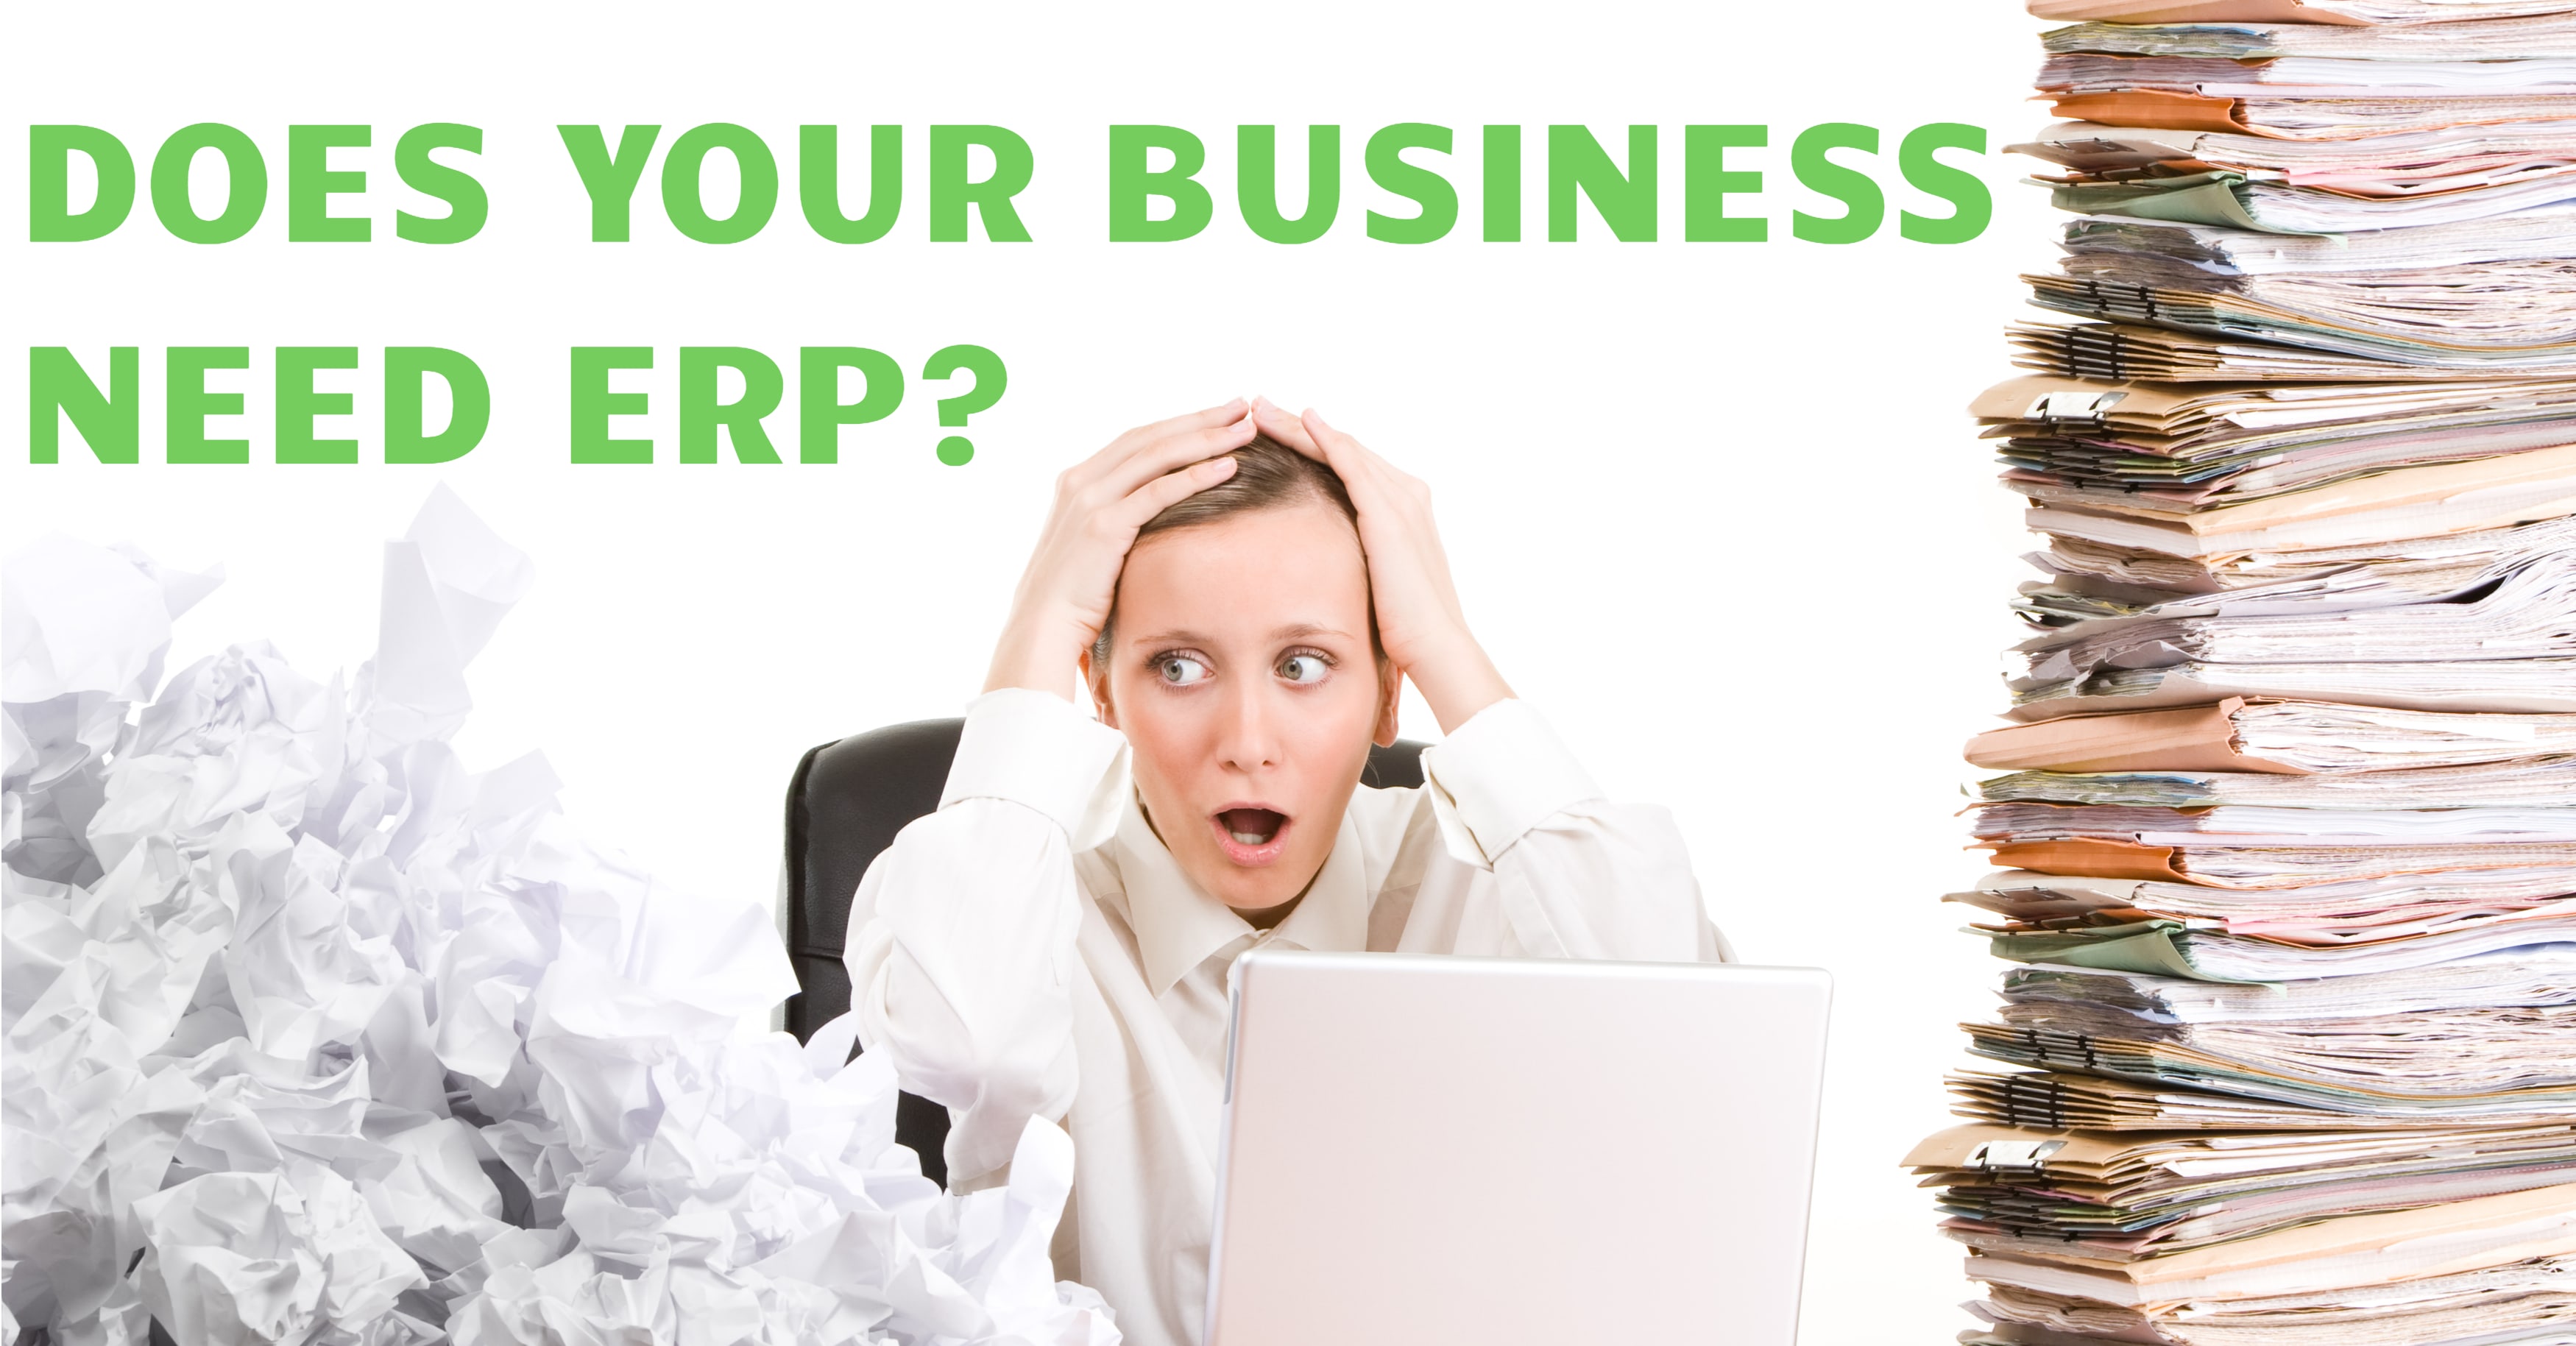 Does Your Business Need ERP